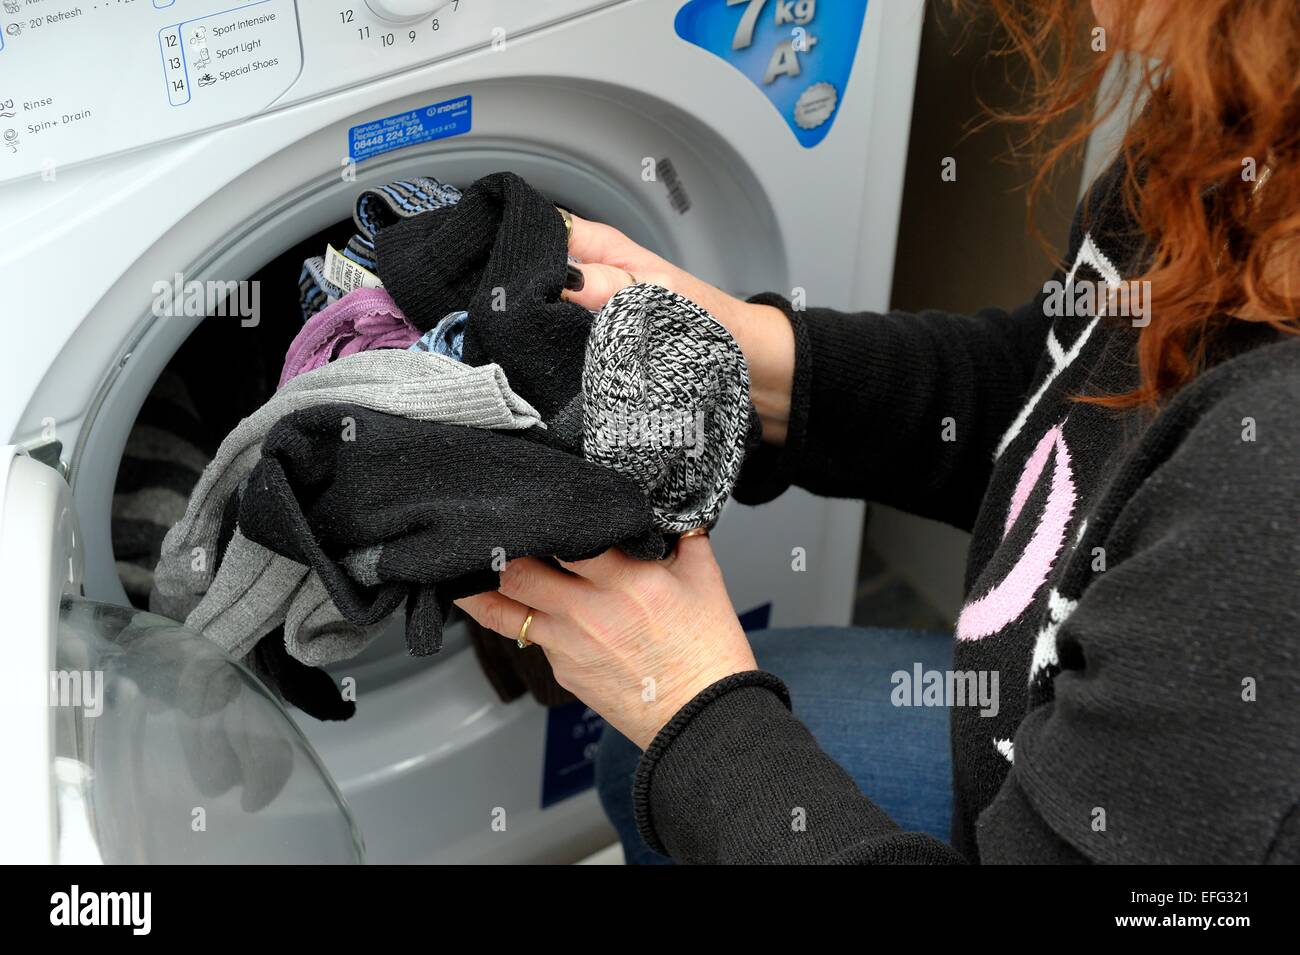 A woman removing washing from a dryer Stock Photo